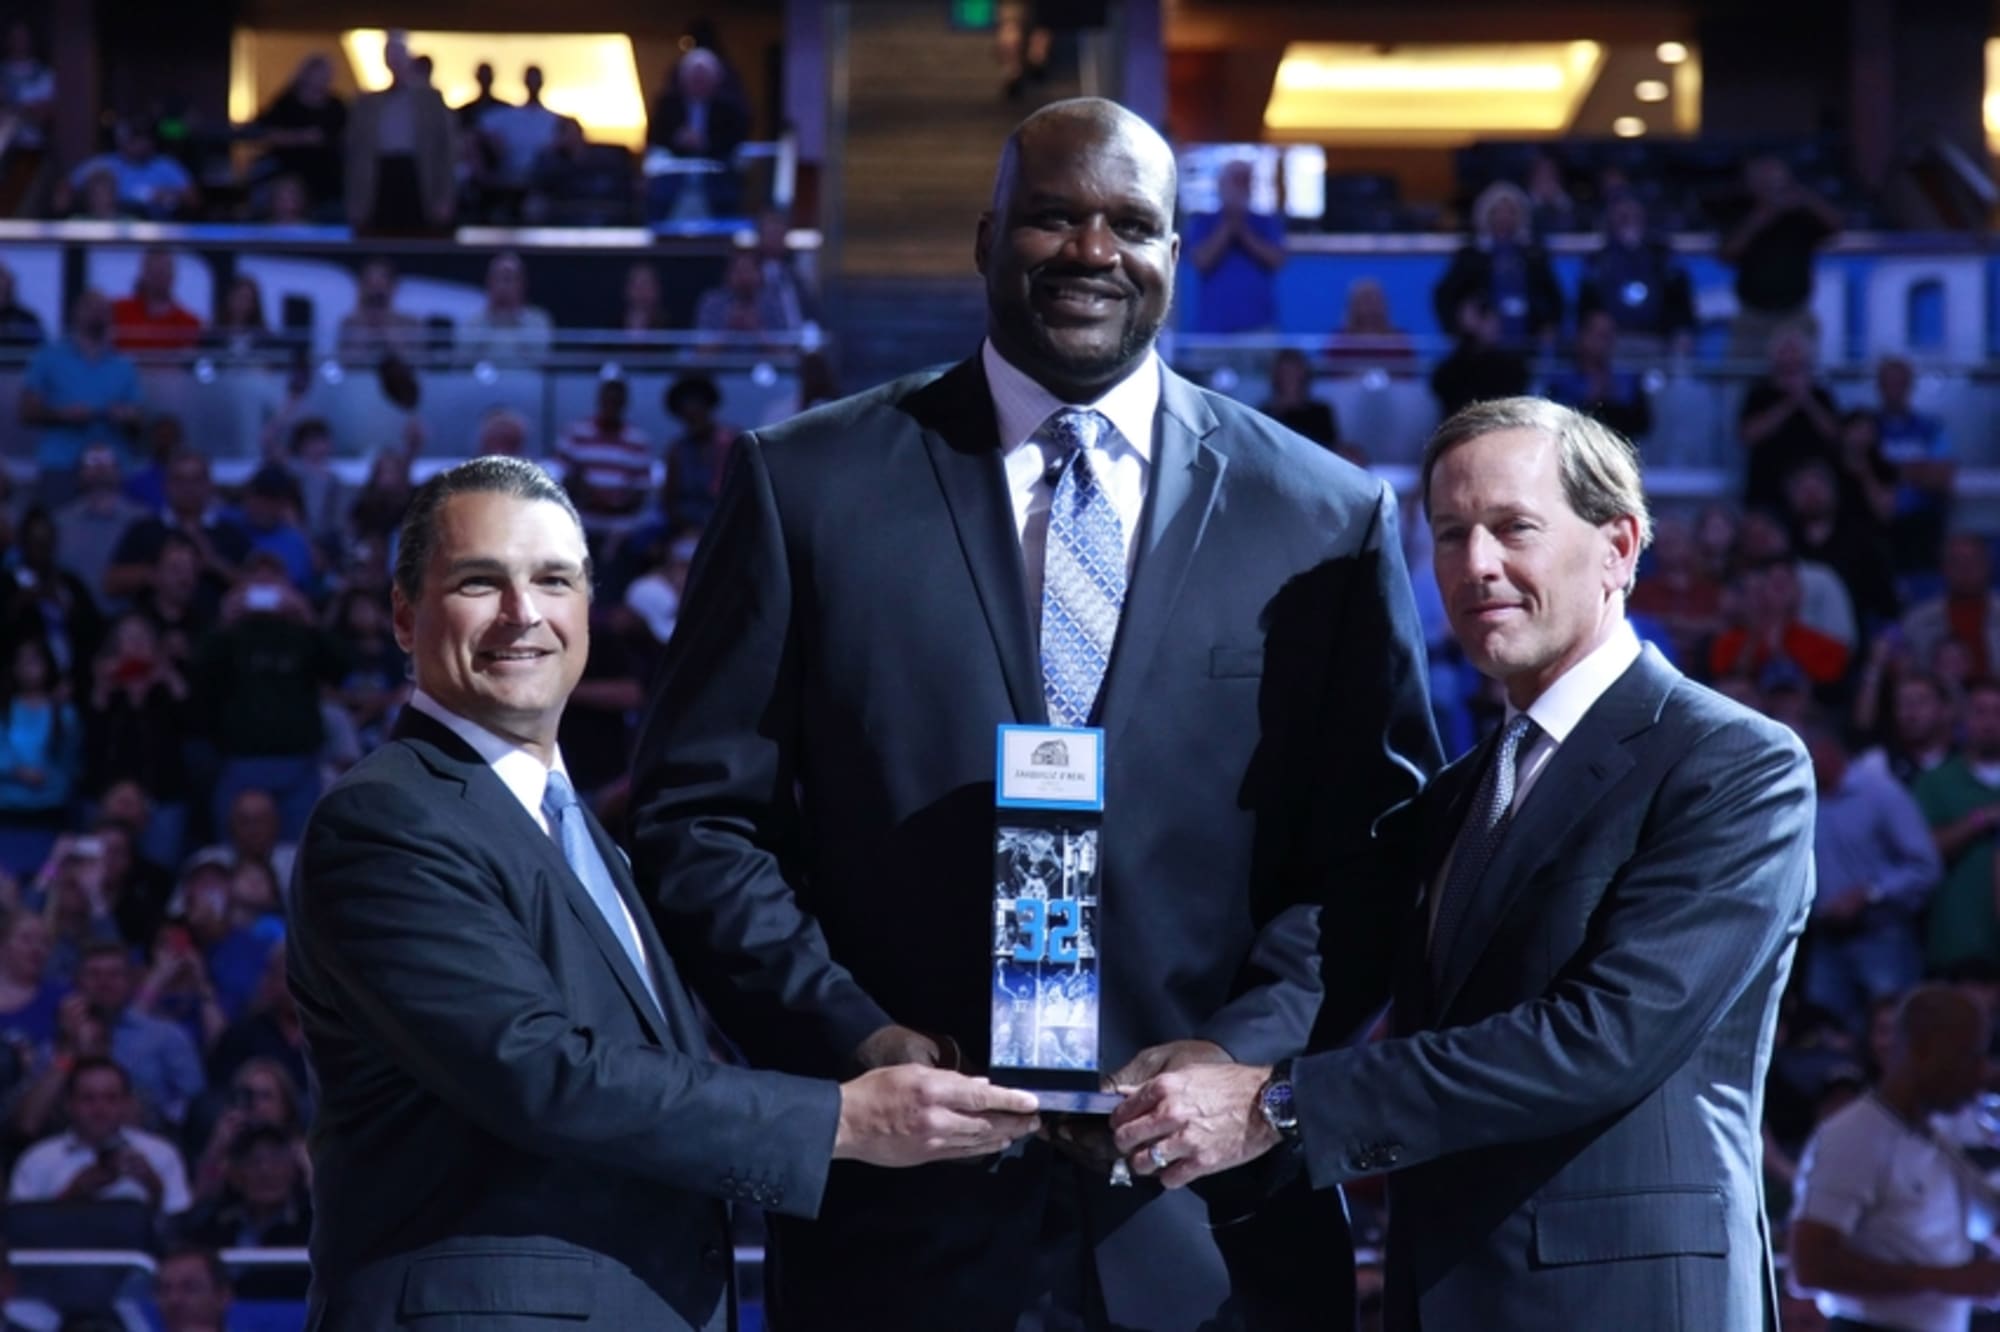 Miami Heat to retire Shaquille O'Neal's jersey number next season